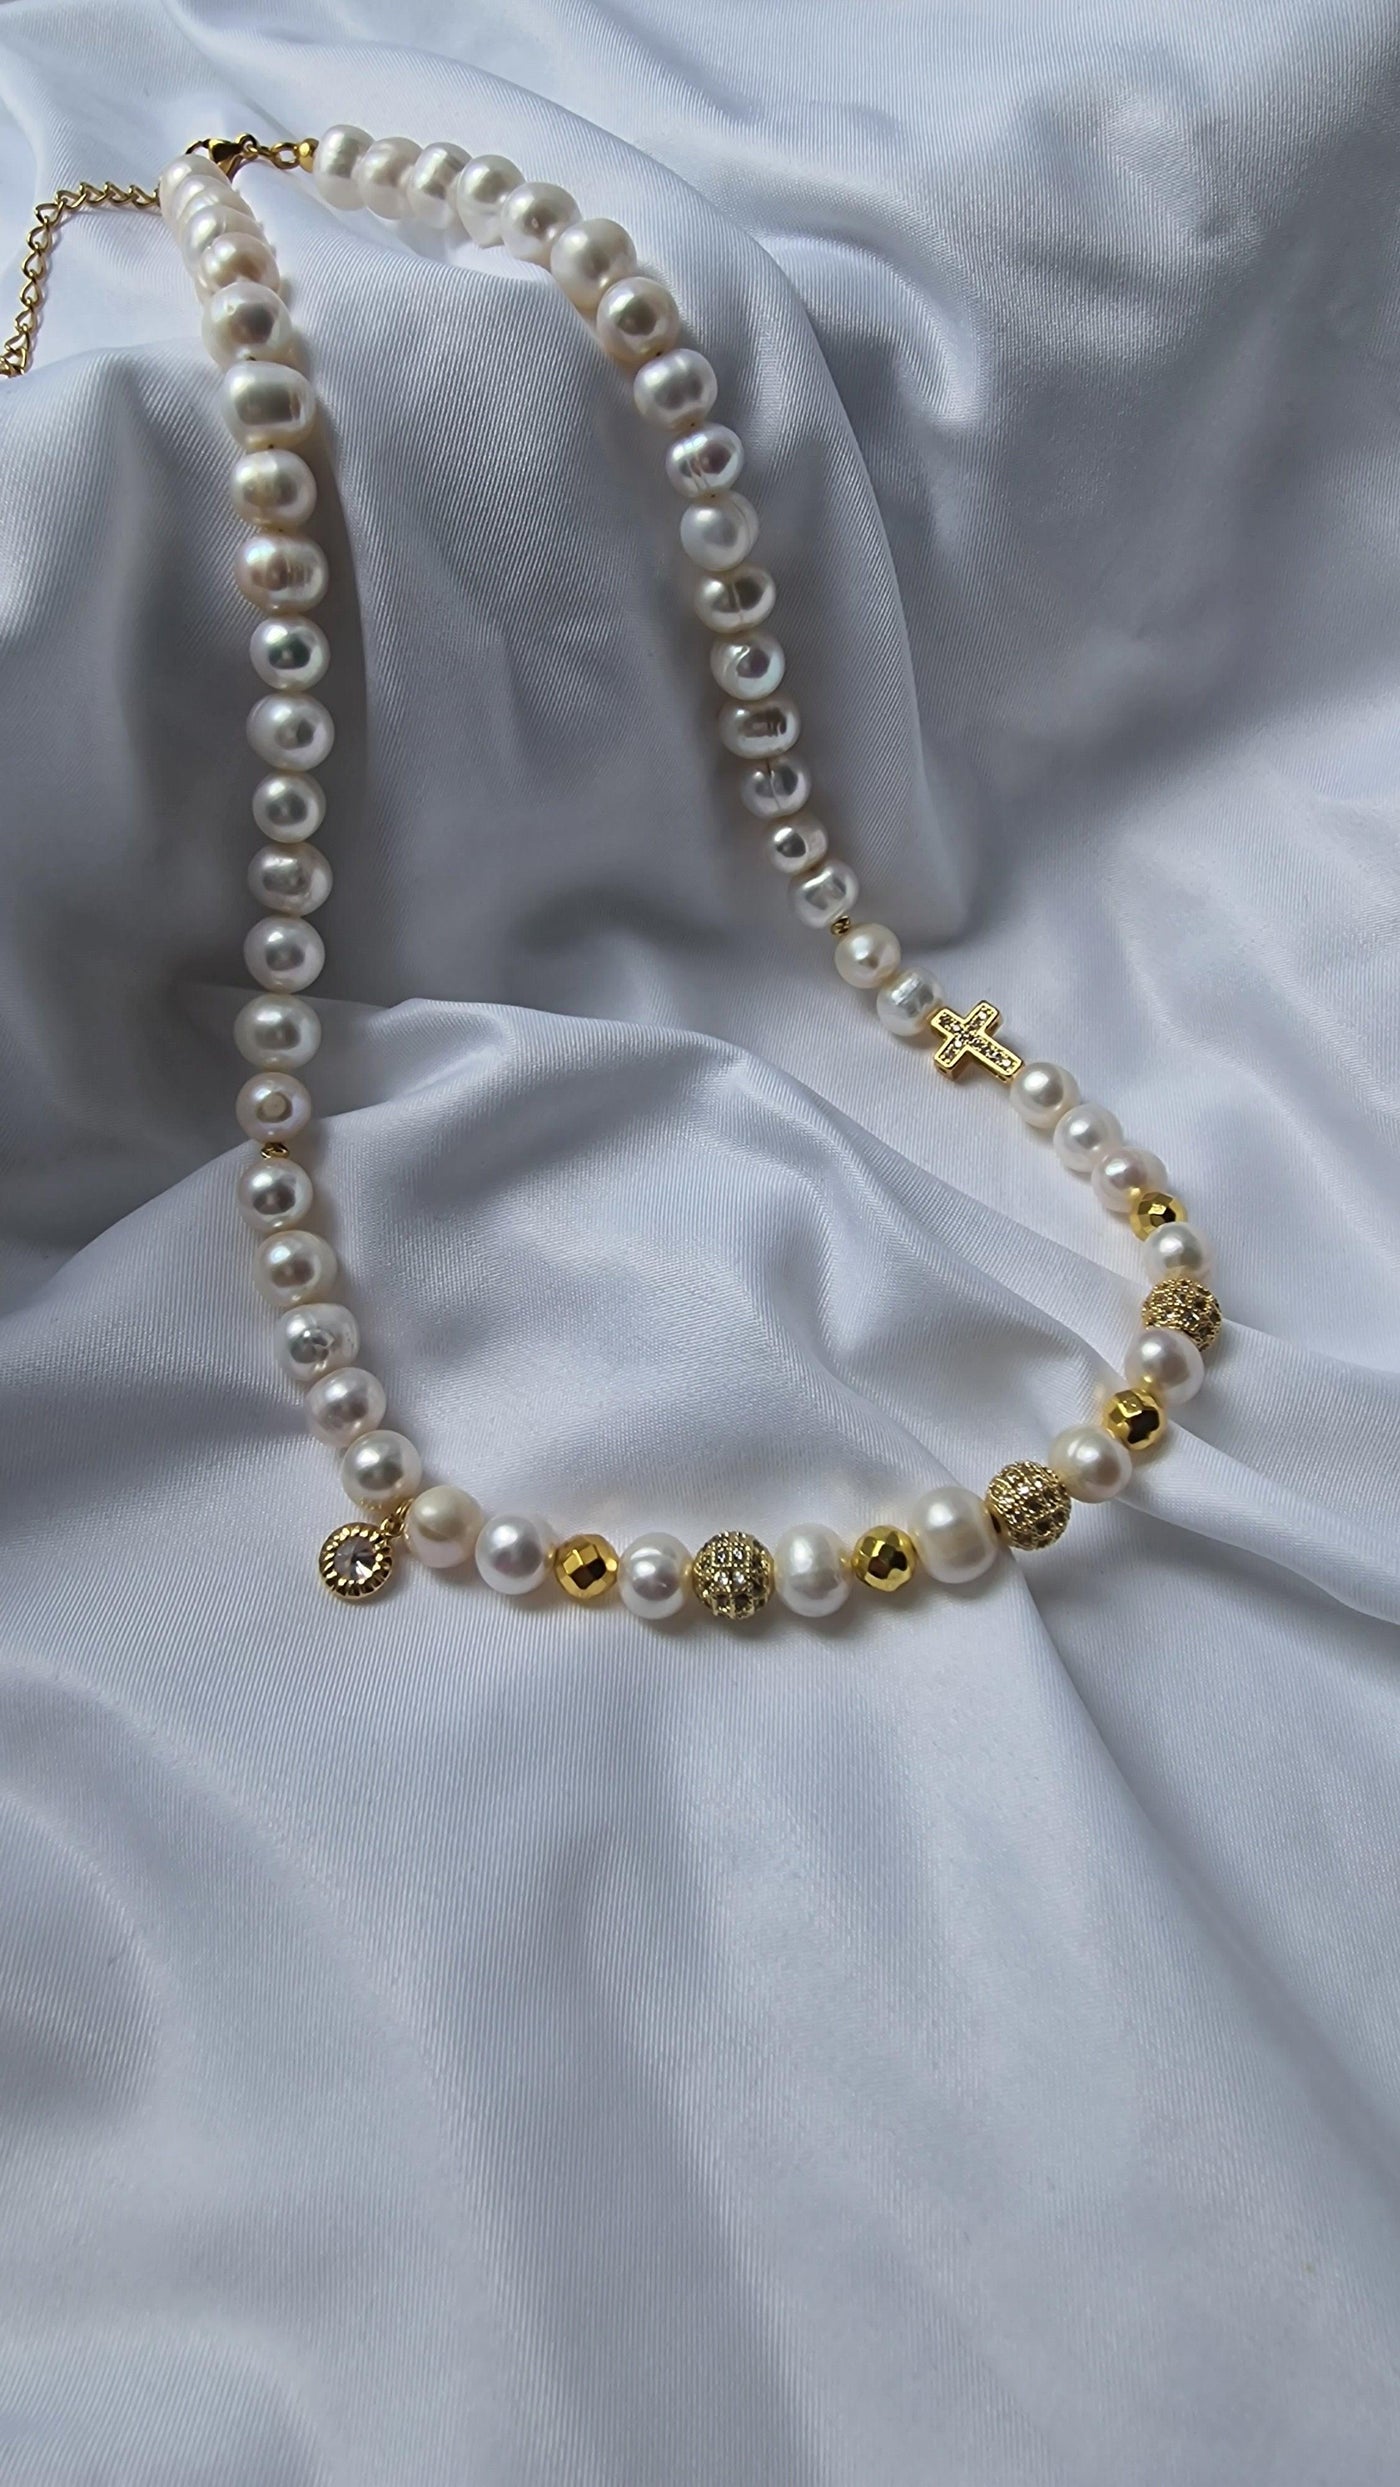 Shebelle Real Pearl Necklace - MELINIE